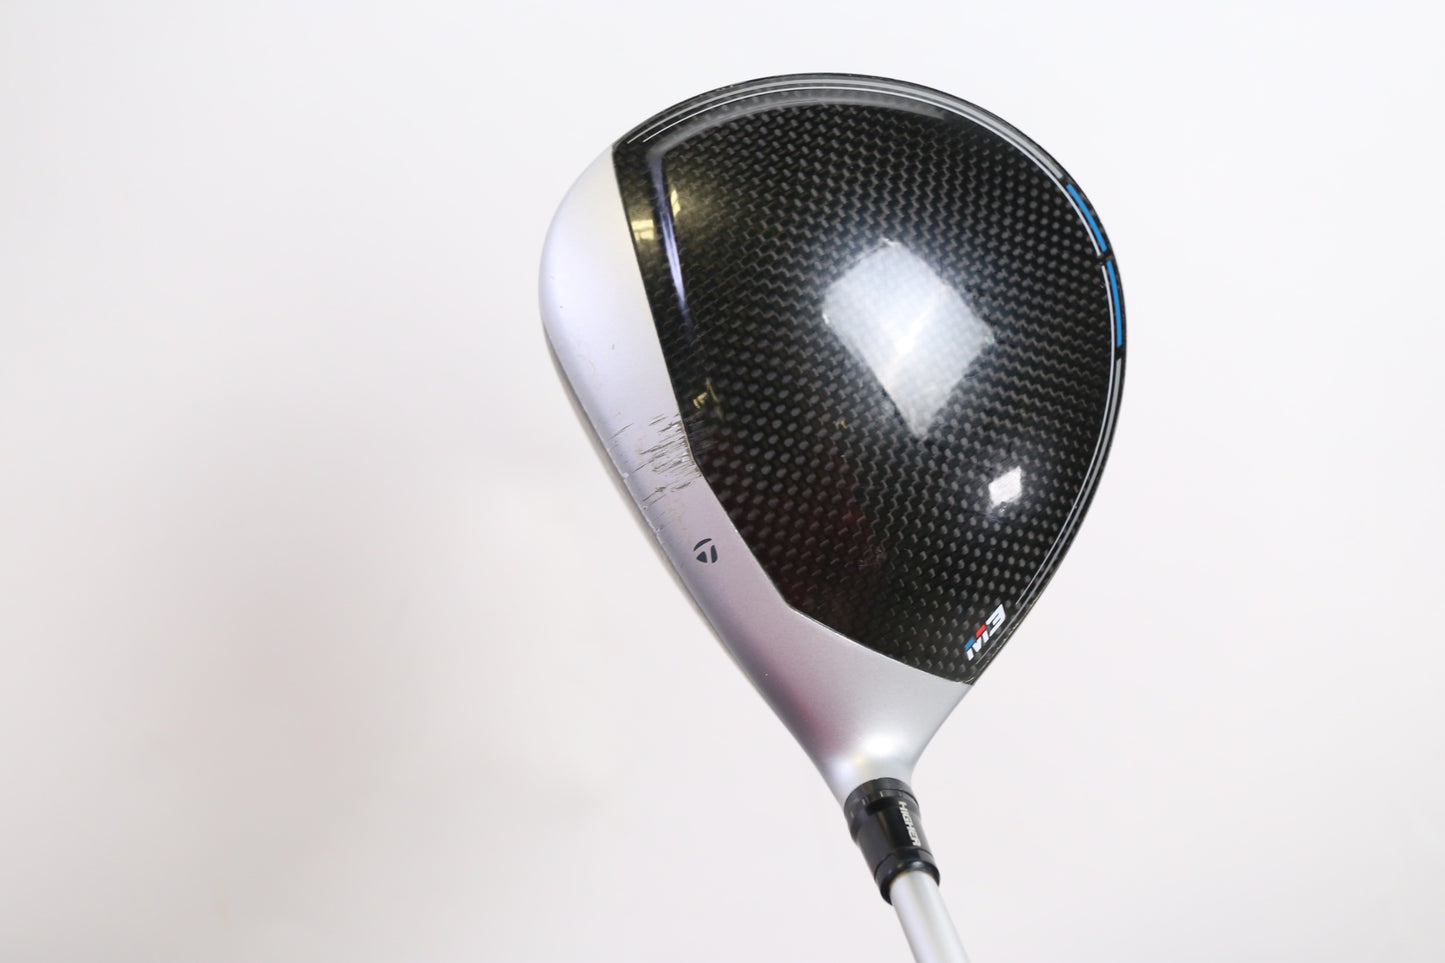 Used TaylorMade M3 Driver - Right-Handed - 12 Degrees - Stiff Flex